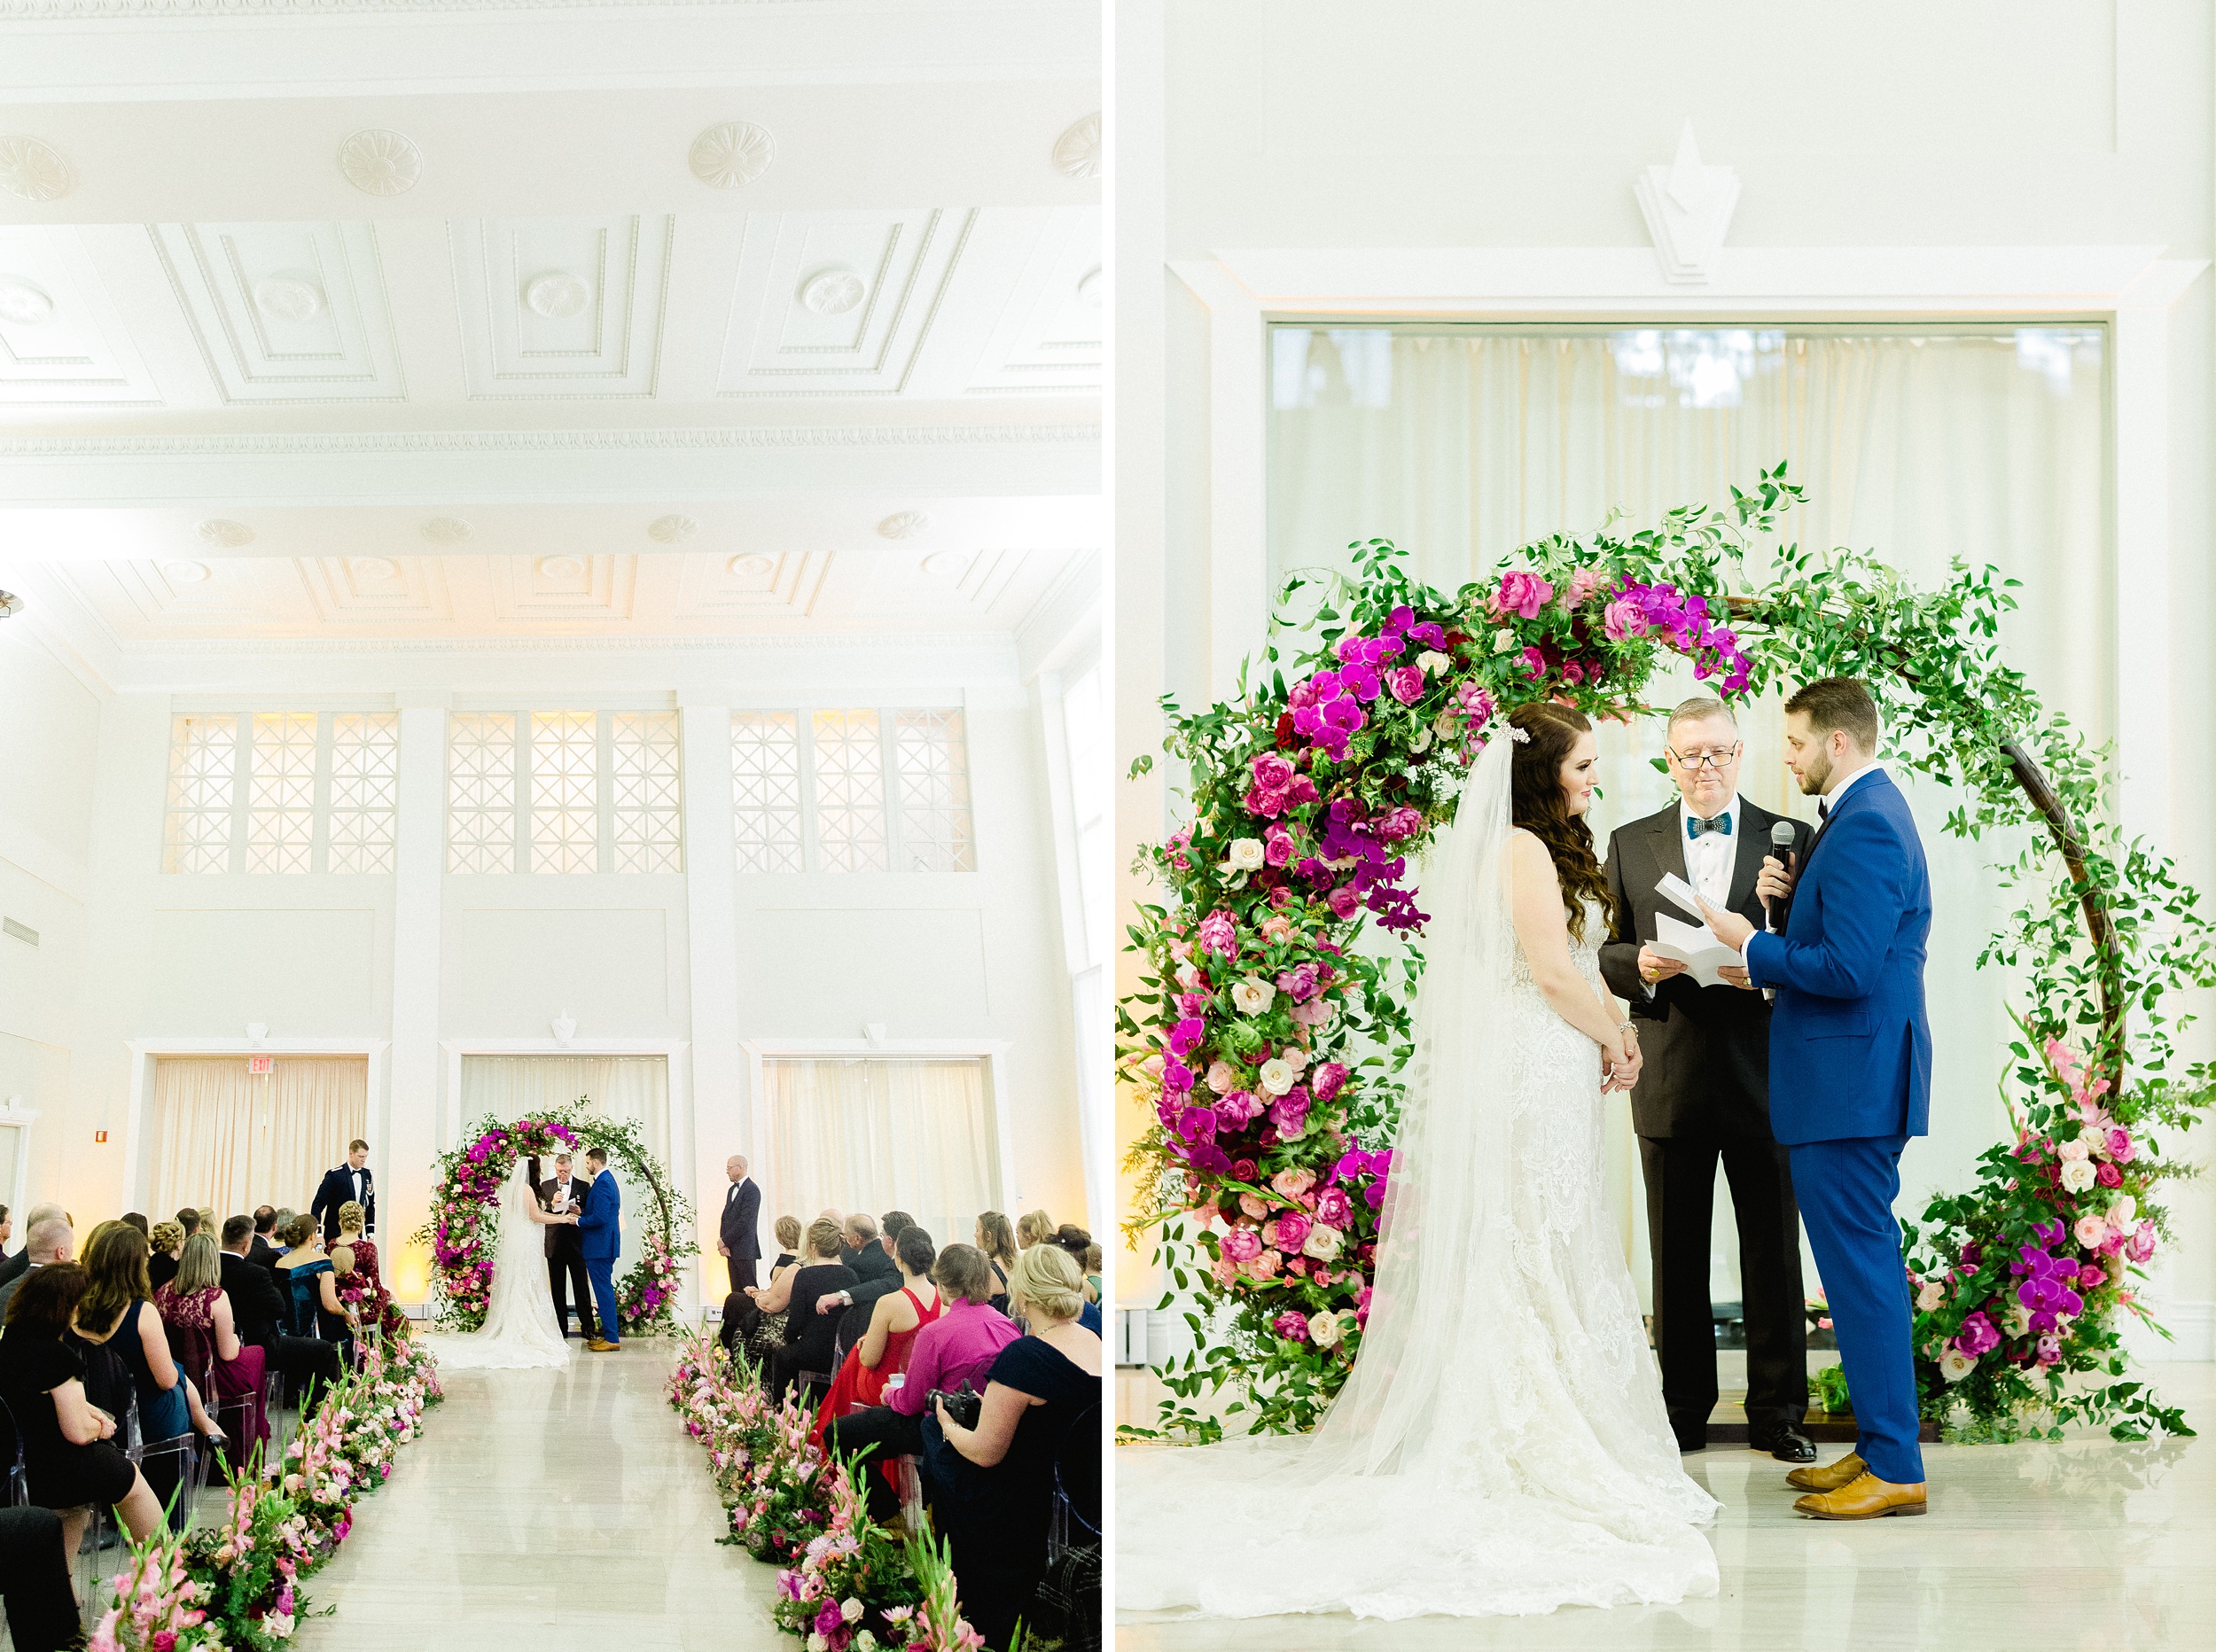 The Vault Tampa Wedding | © Ailyn La Torre Photography 2020